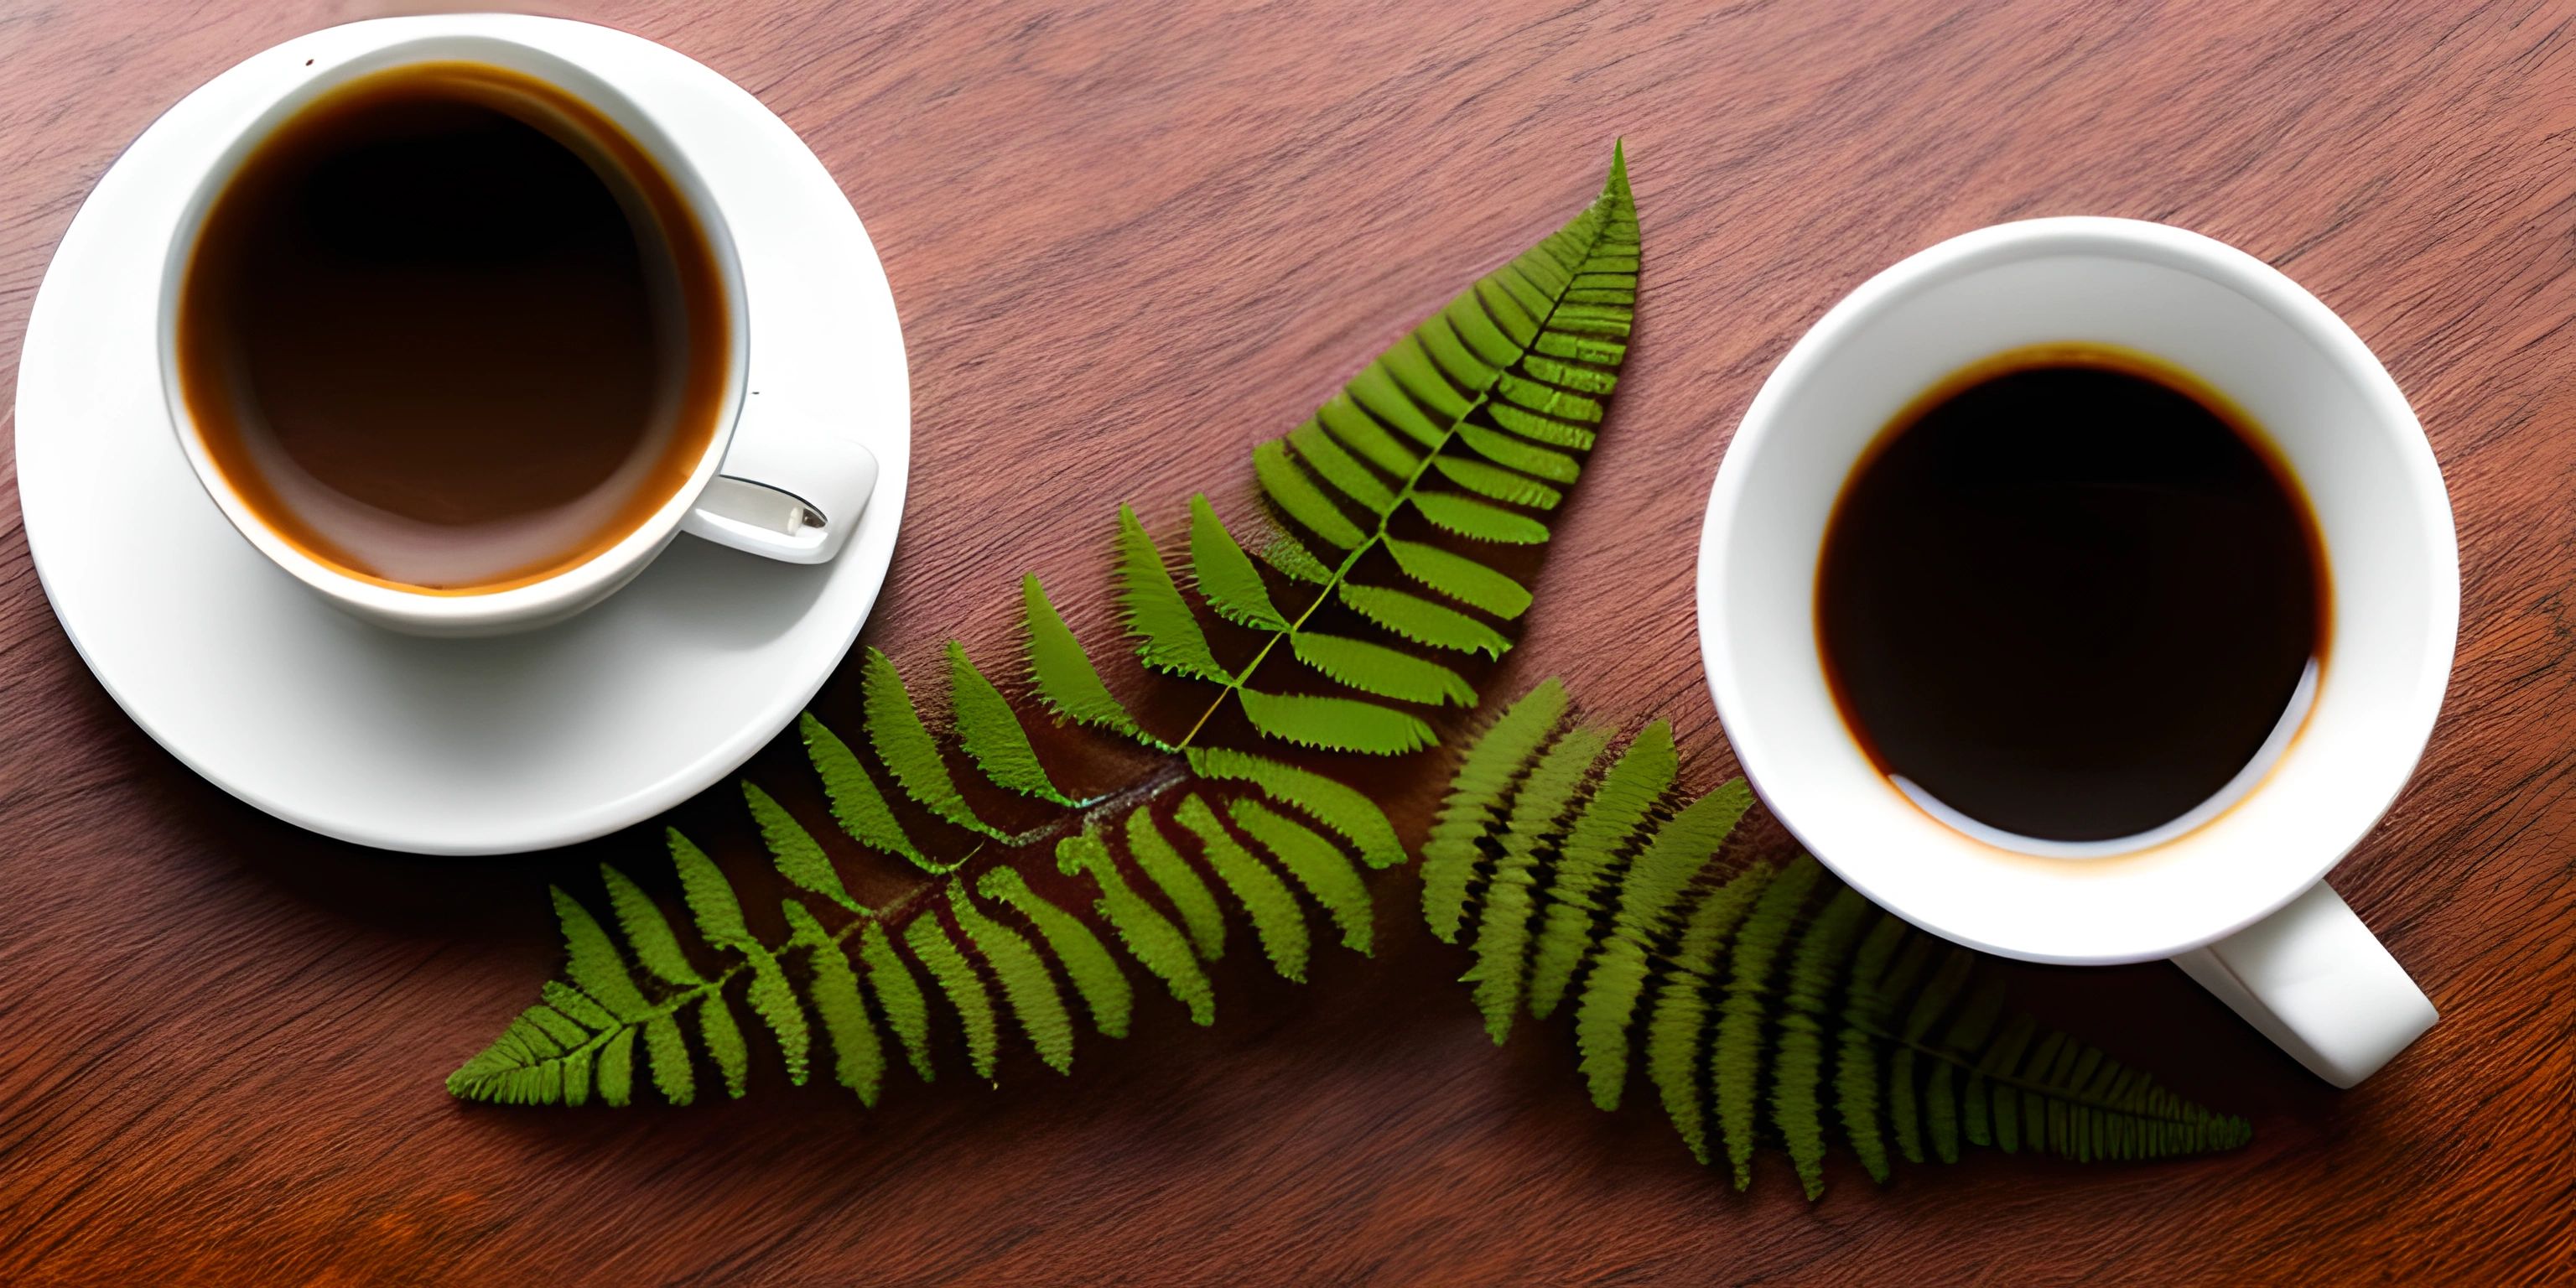 two cups of coffee sit on a table with a fern leaf nearby them and green leaves